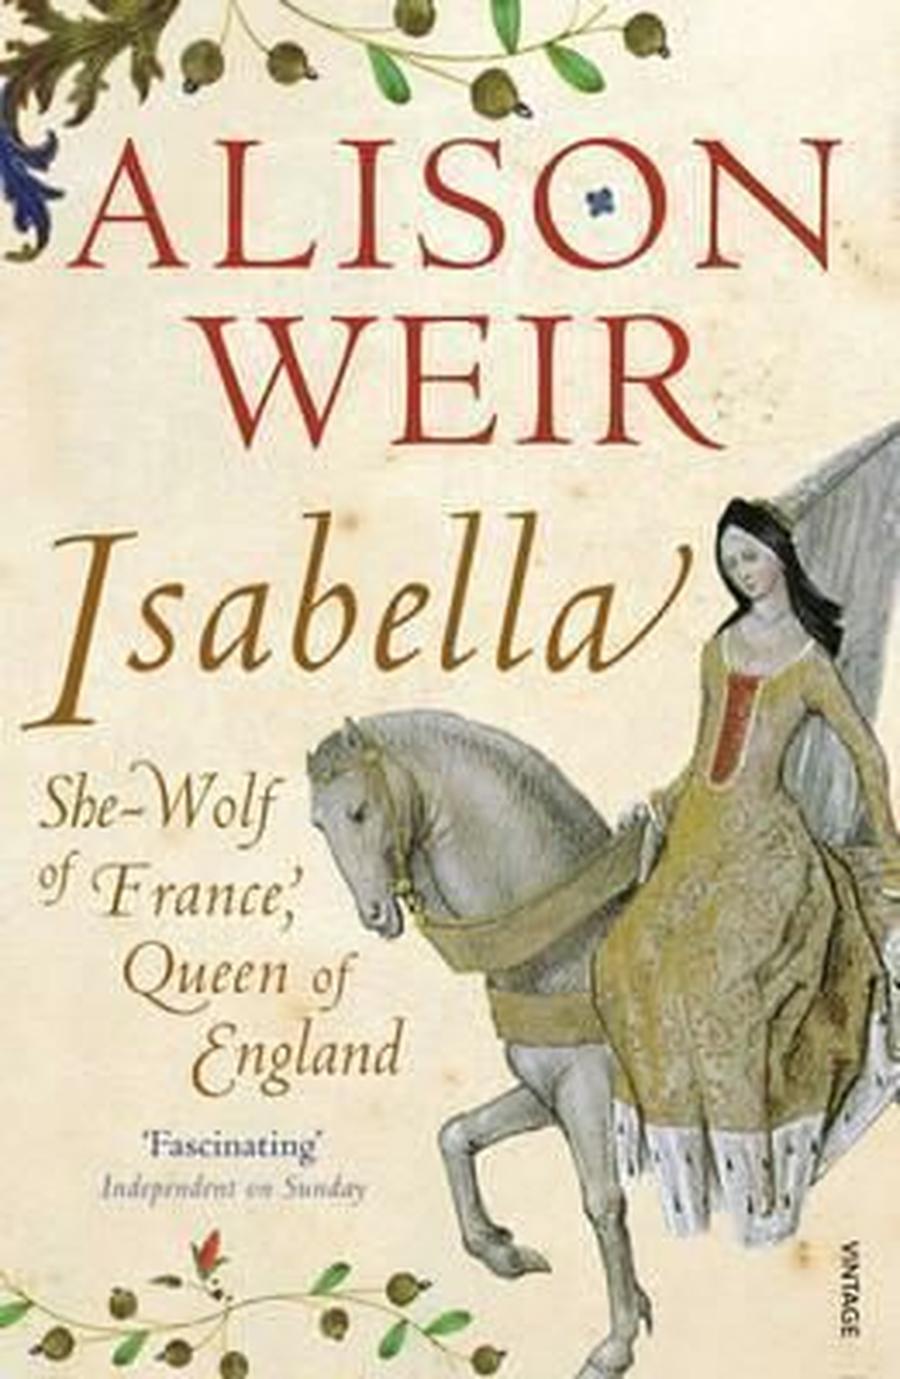 Isabella : She-Wolf of France, Queen of England